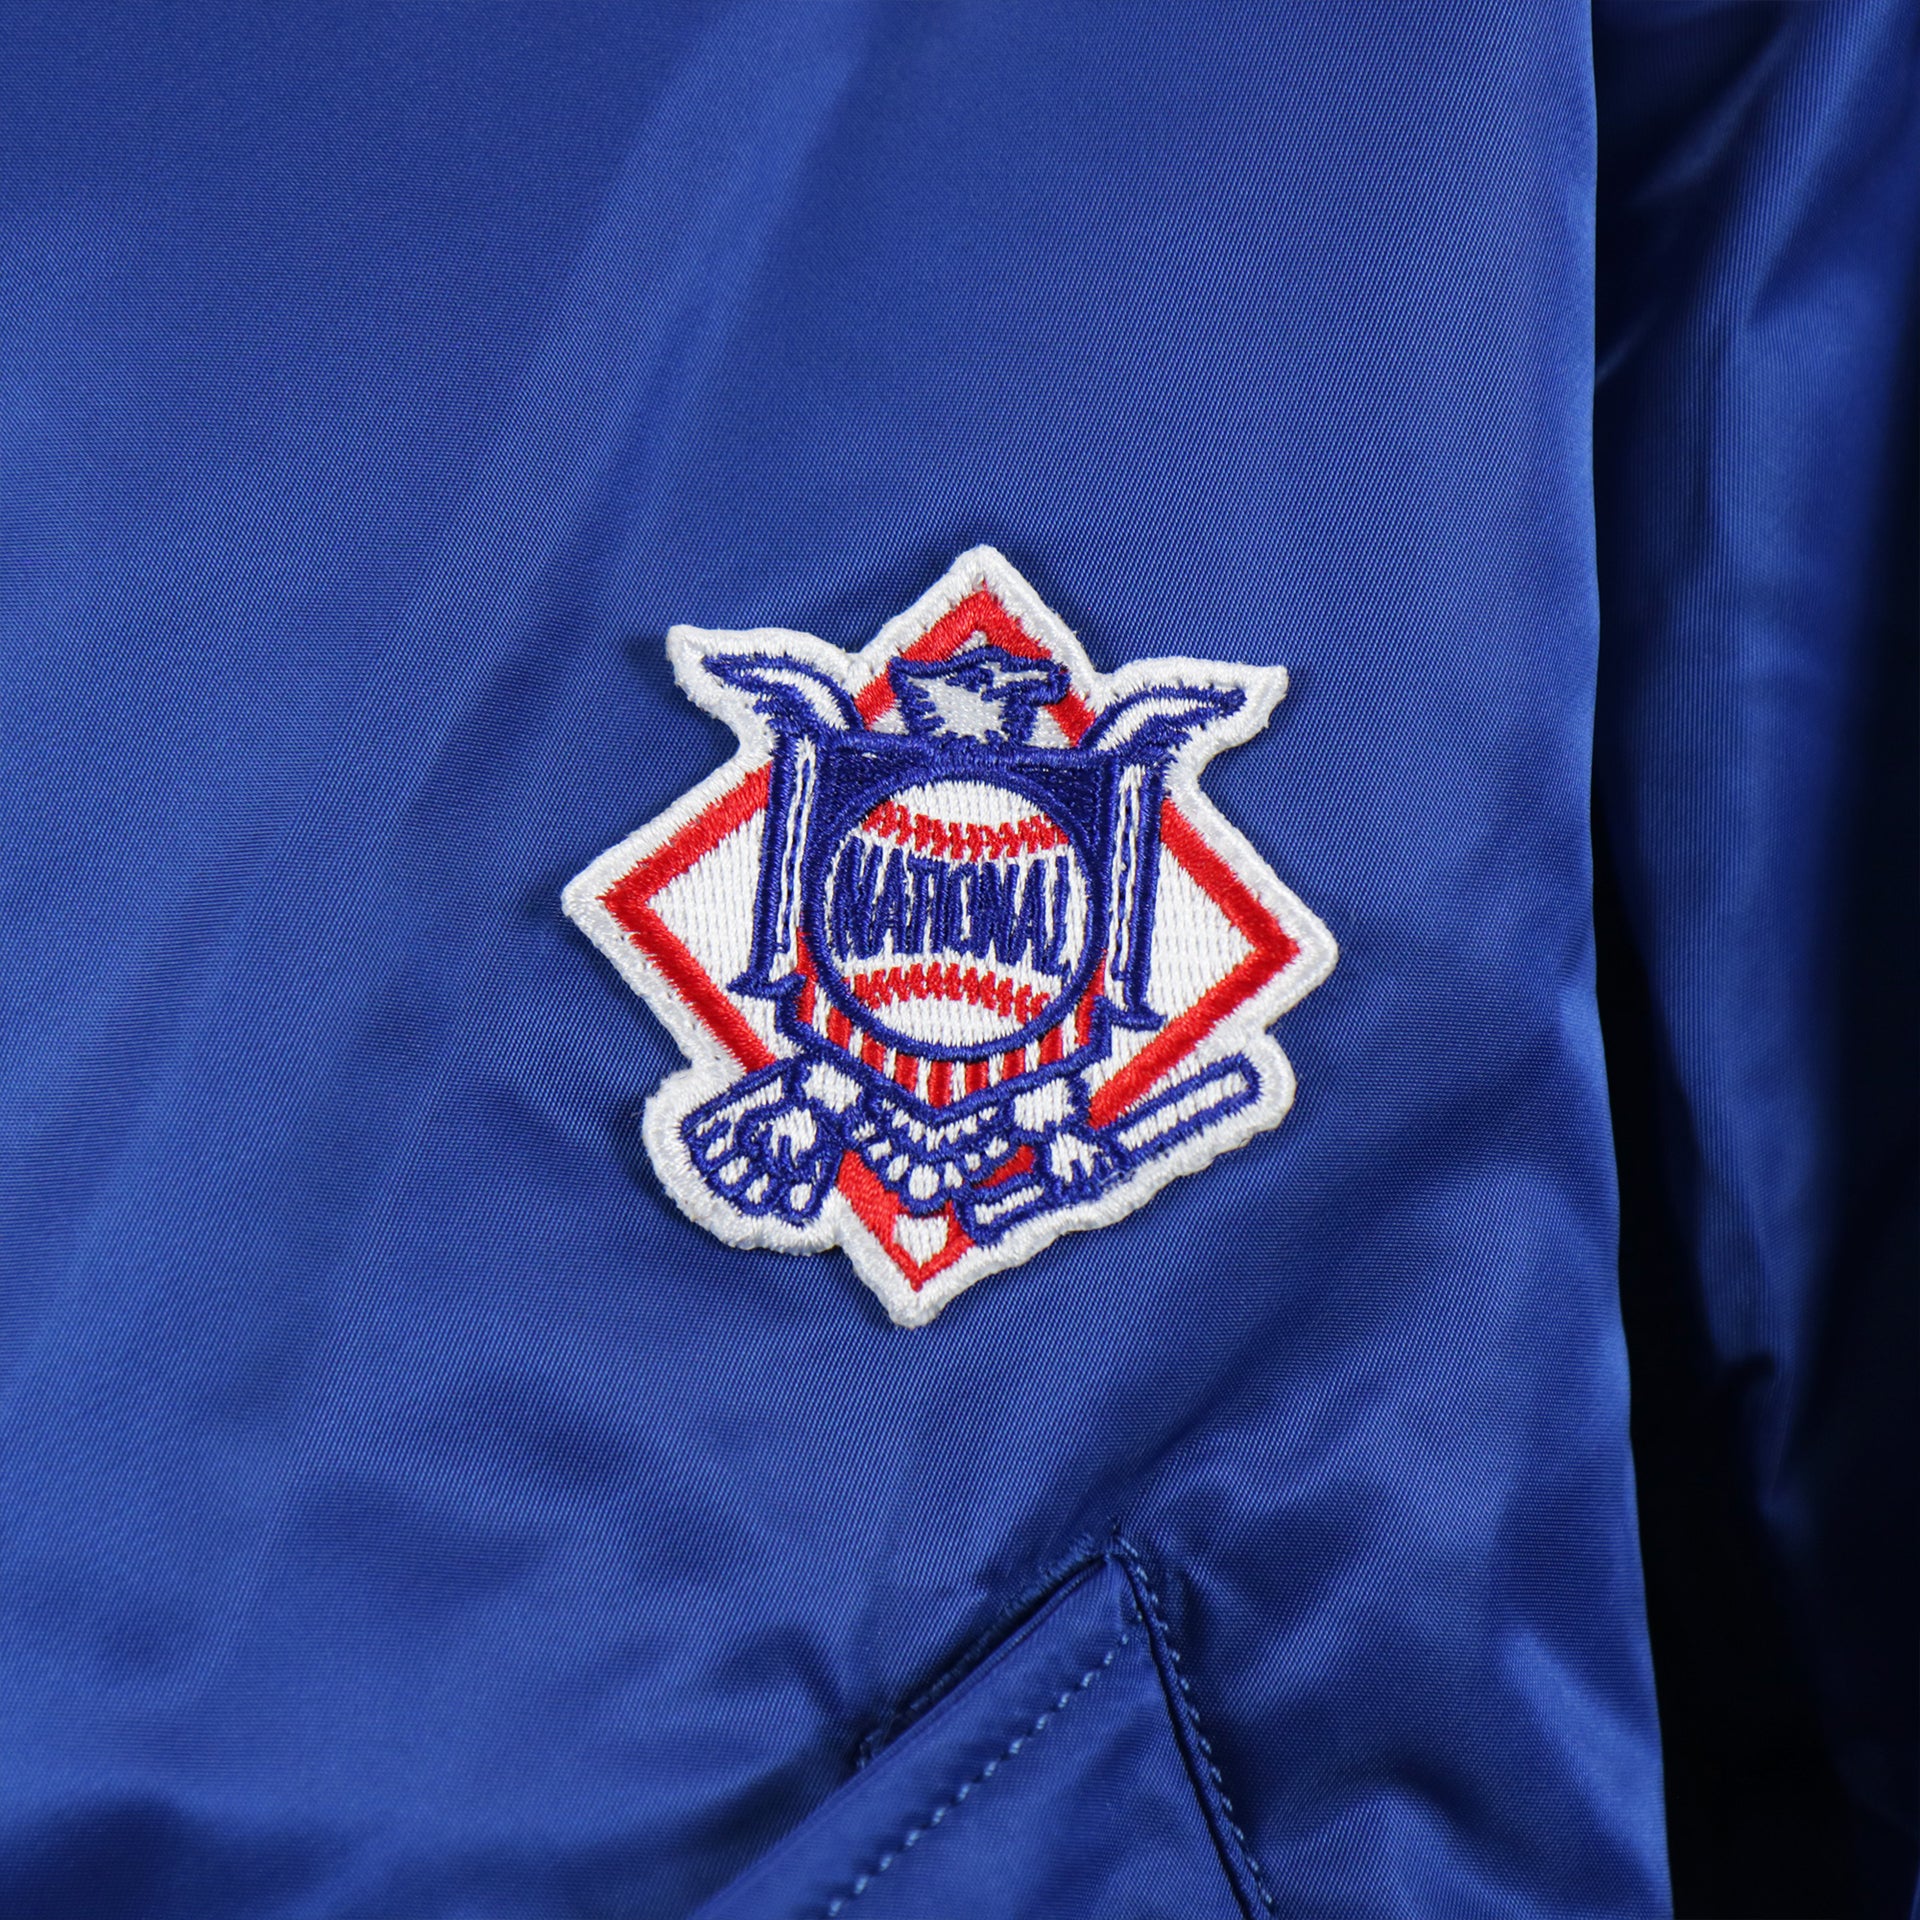 The National League Side Patch on the Cooperstown Brooklyn Dodgers MLB Patch Alpha Industries Reversible Bomber Jacket With Camo Liner | Royal Blue Bomber Jacket